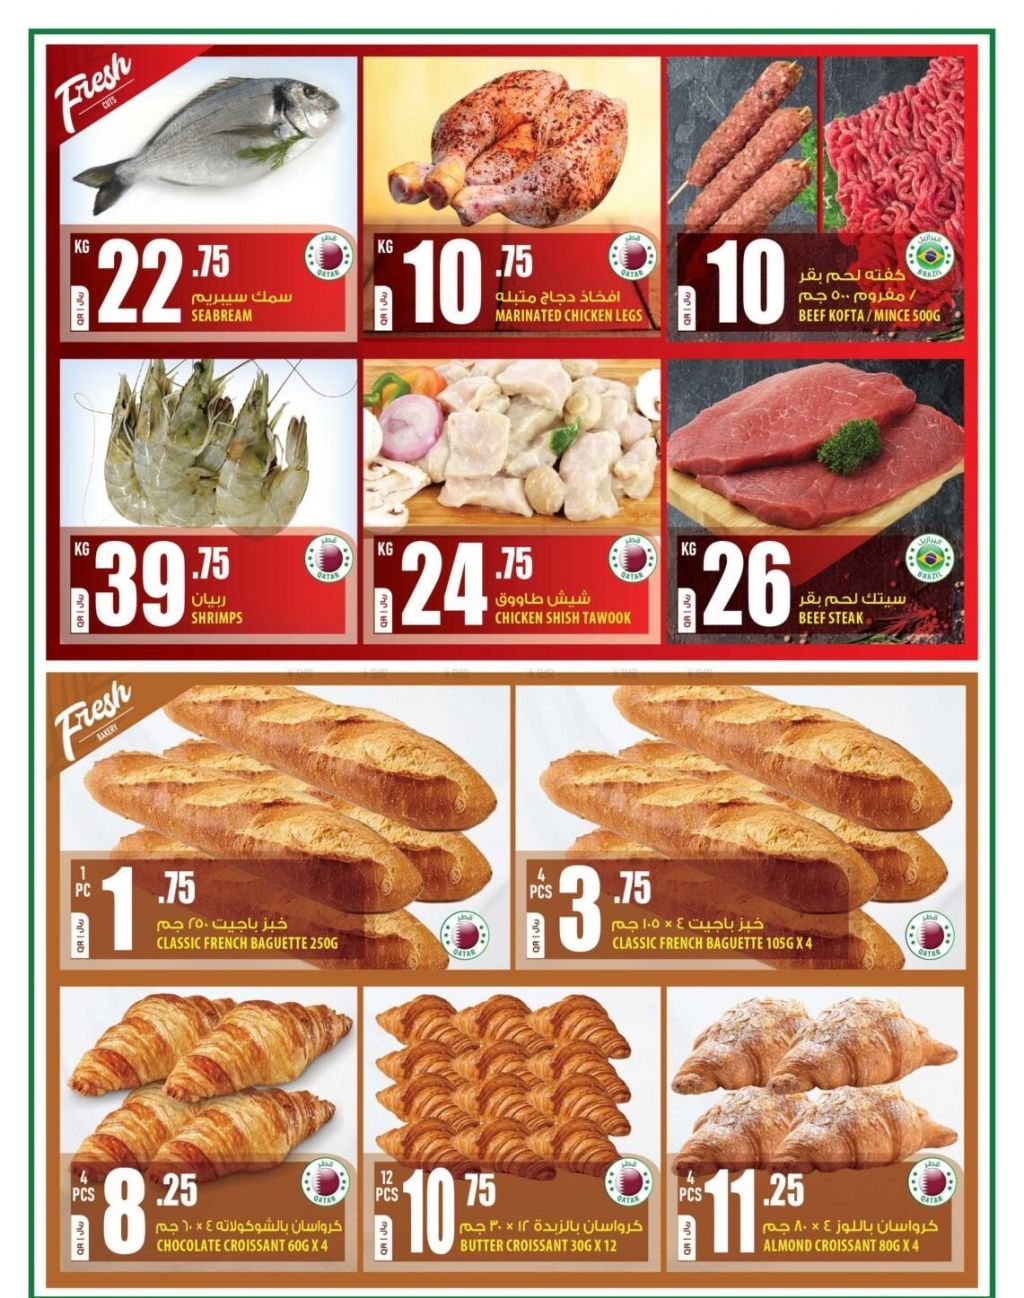 Breakfast Foods Promotions offer - in Doha #97 - 1  image 